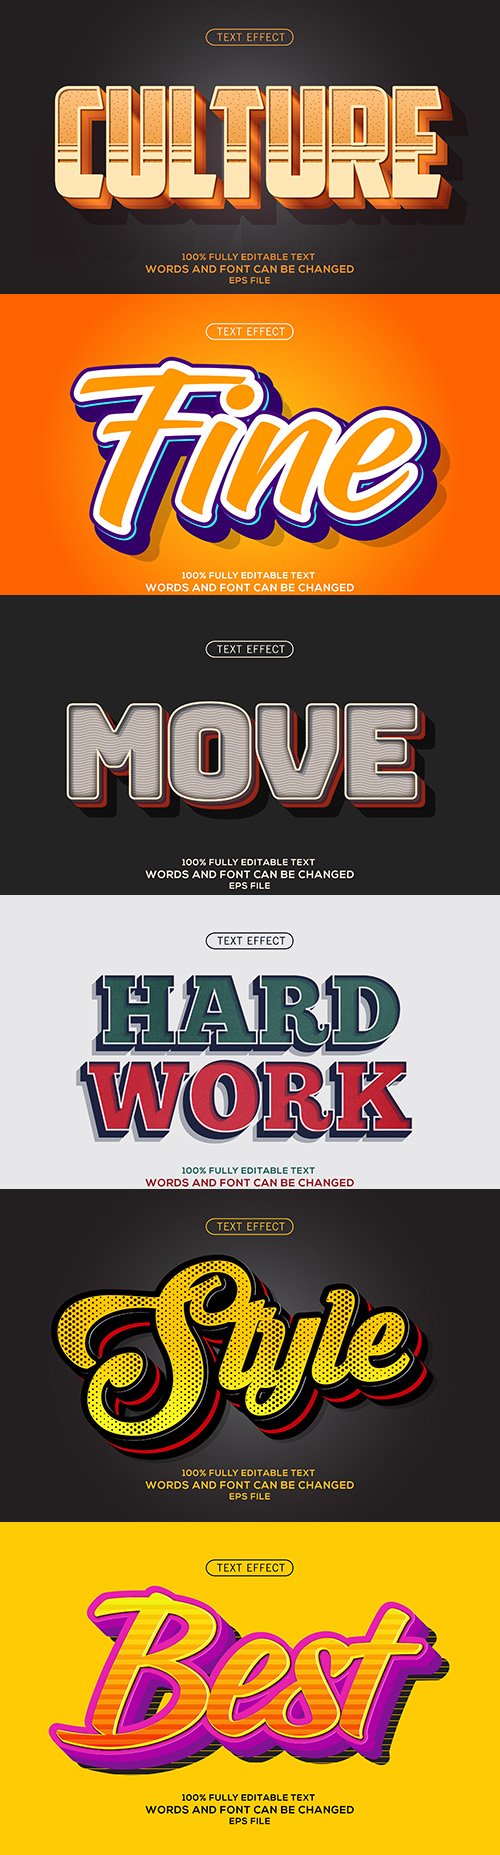 Editable font effect text collection illustration 29